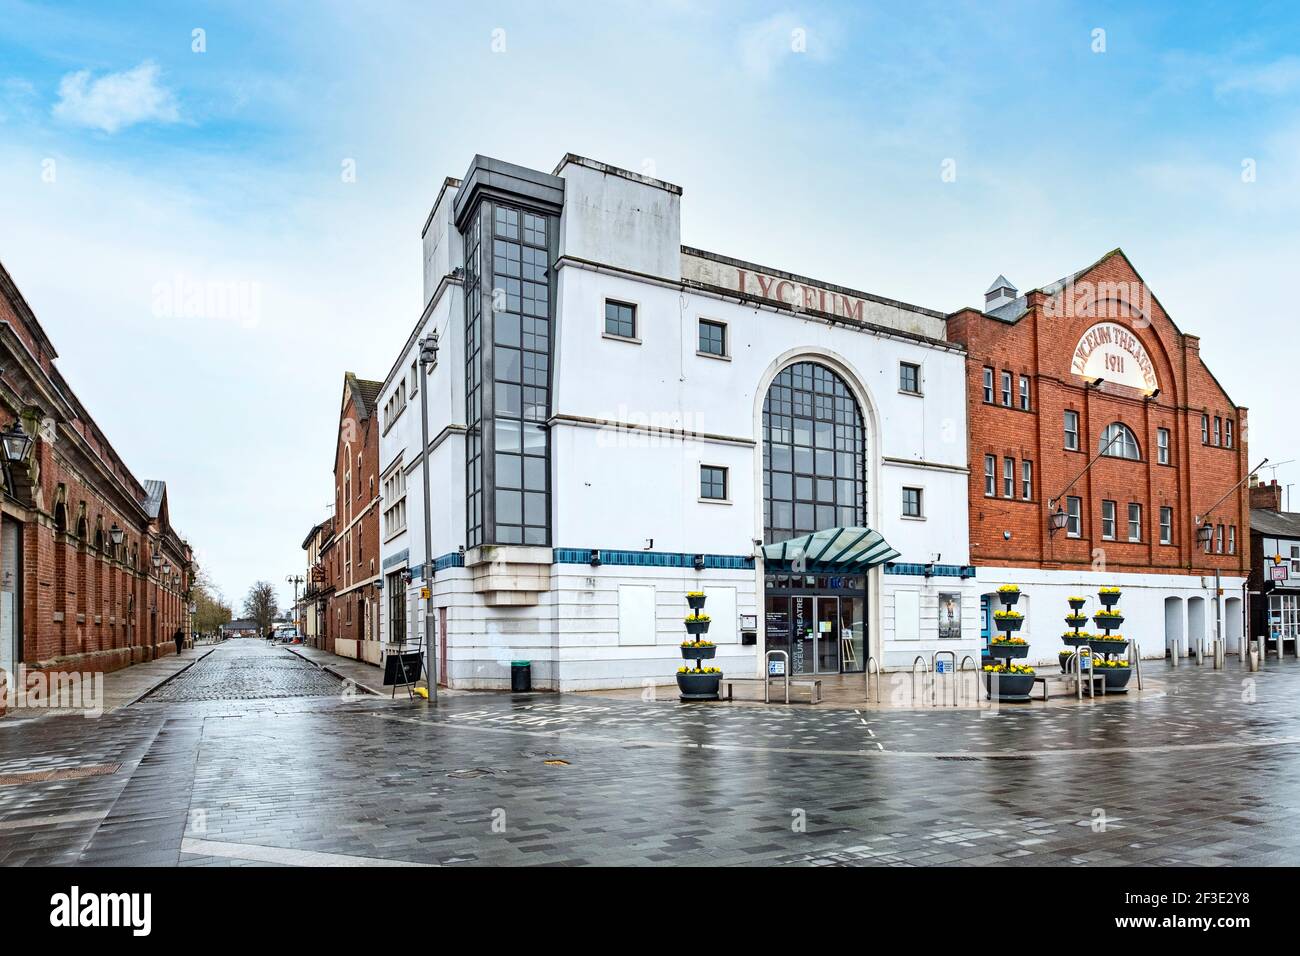 Lyceum Theatre with the renovated market hall on the left in Crewe Cheshire UK Stock Photo